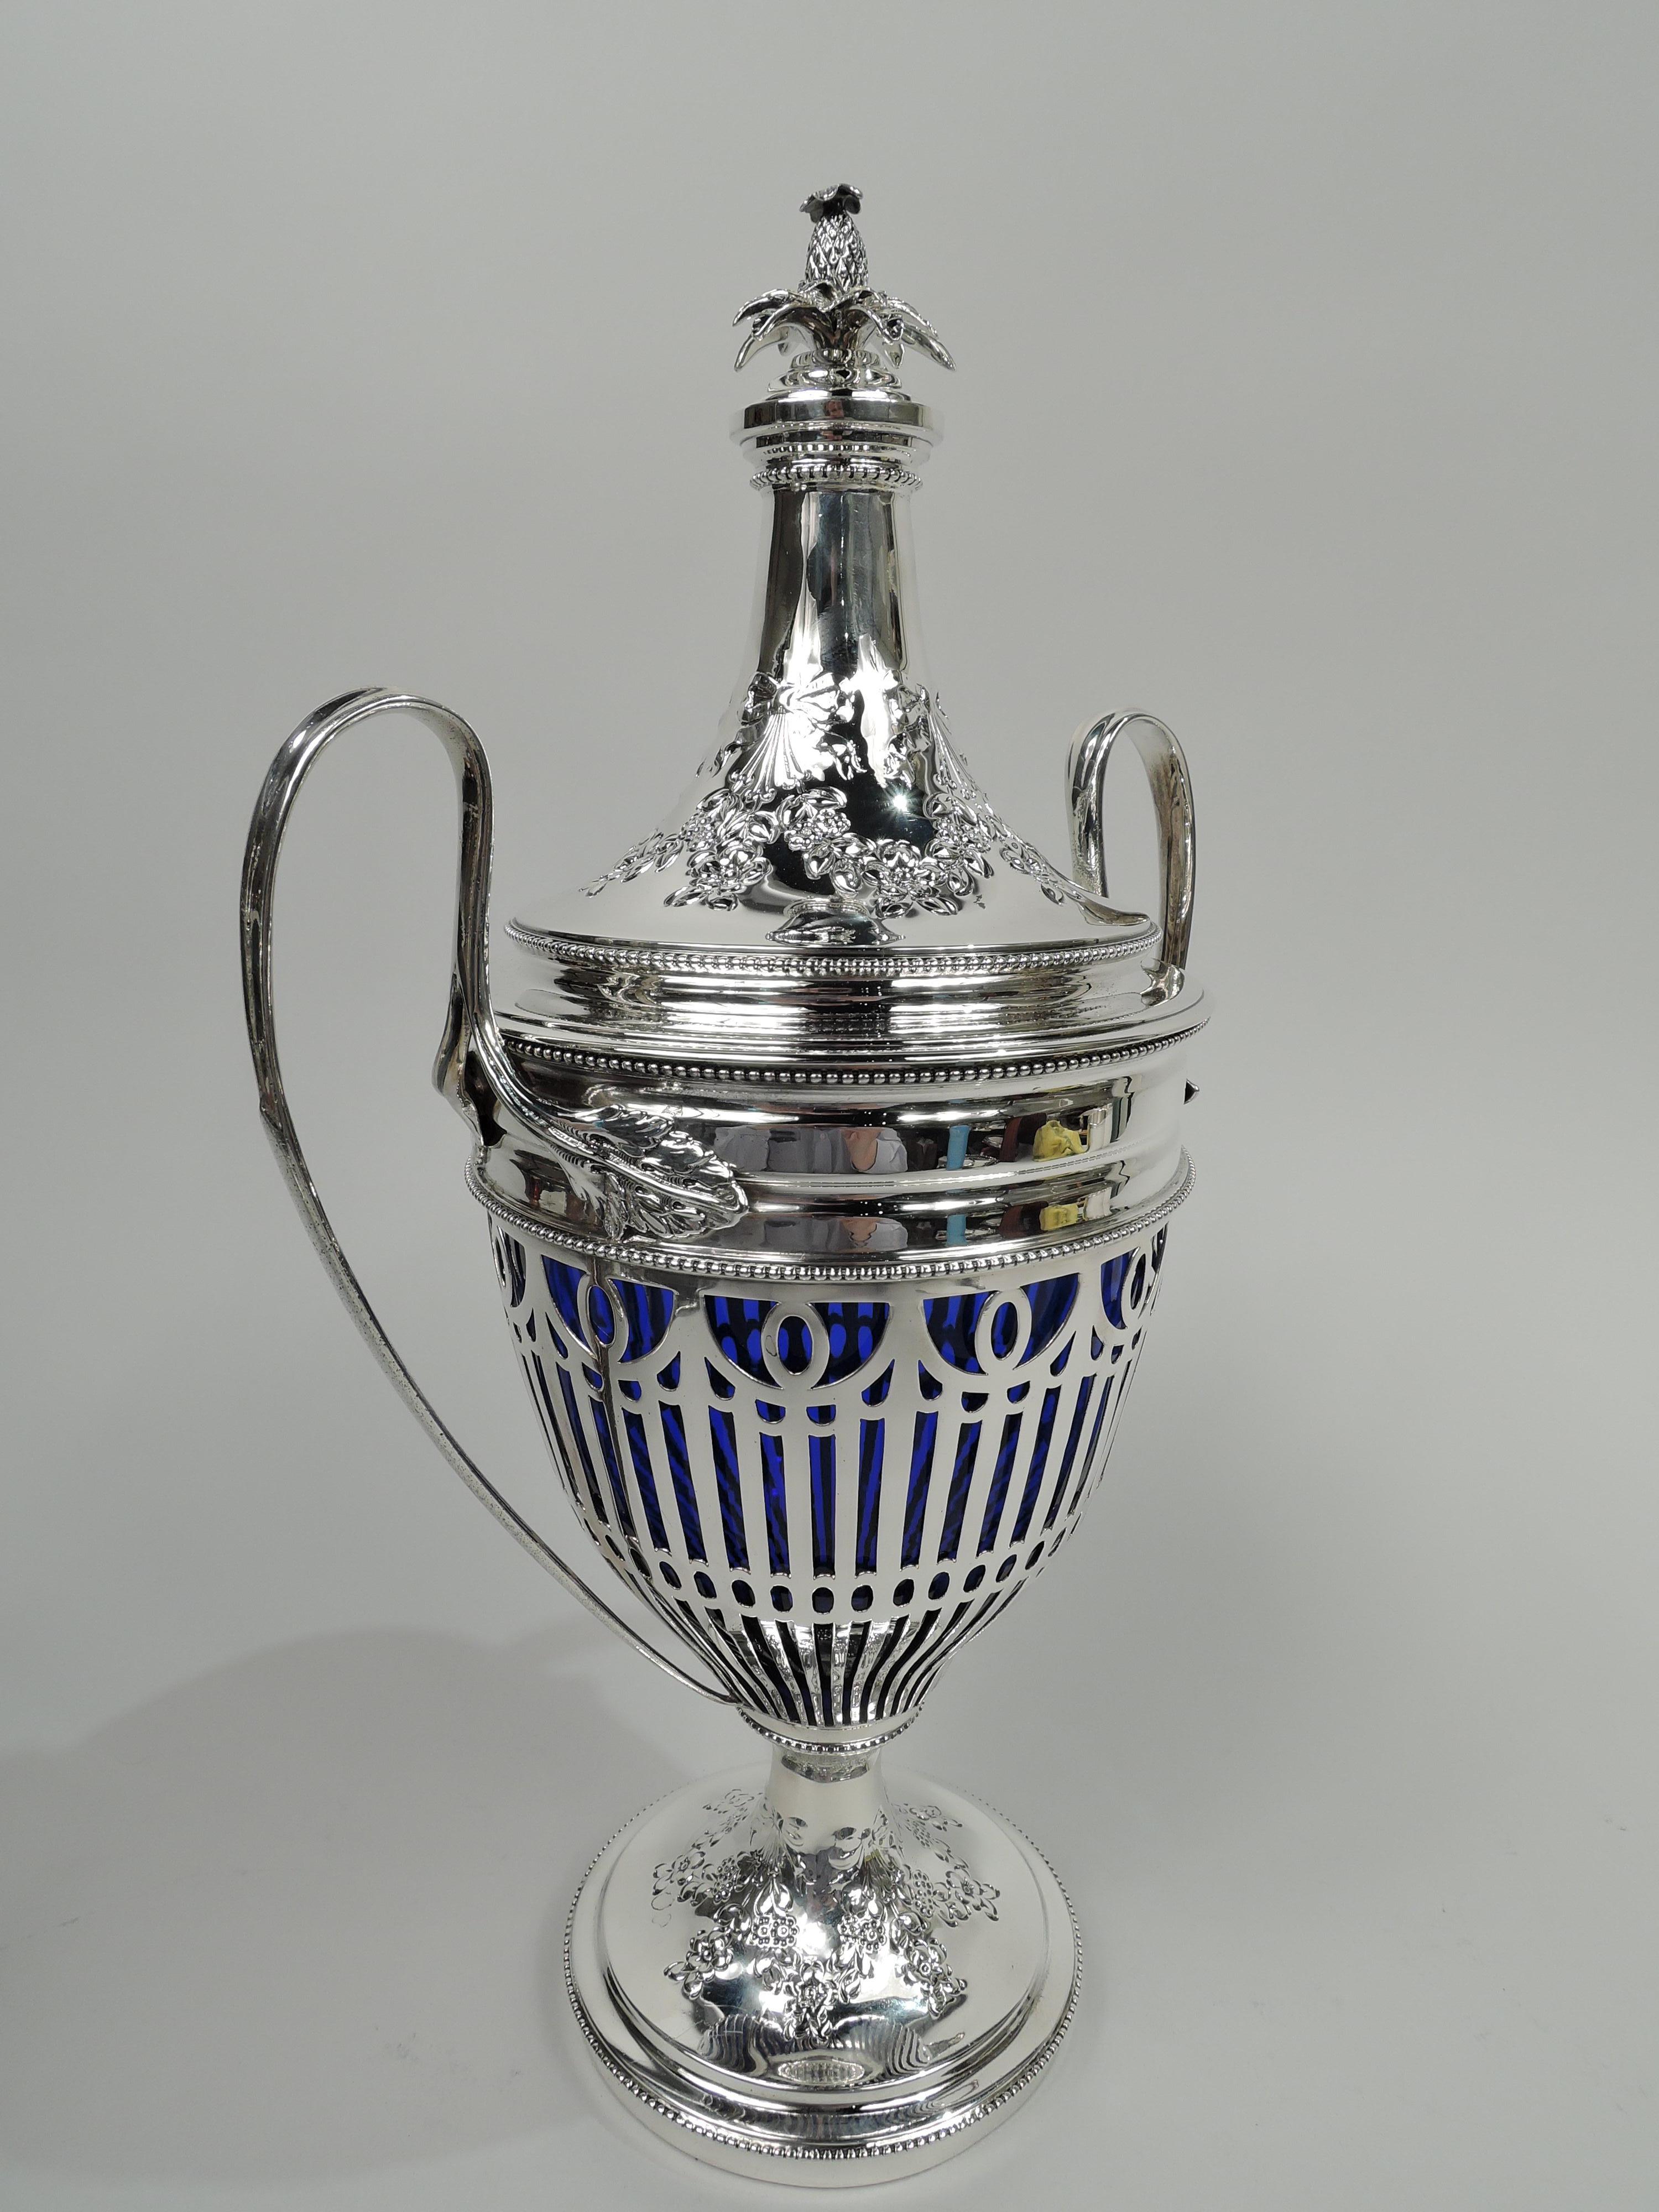 Edwardian Neoclassical sterling silver covered urn. Made by Howard & Co. in New York, ca 1900. Ovoid bowl with high-looping leaf-mounted side handles; domed foot. Cover domed; top stepped with cast pineapple finial. Sides open with flutes and